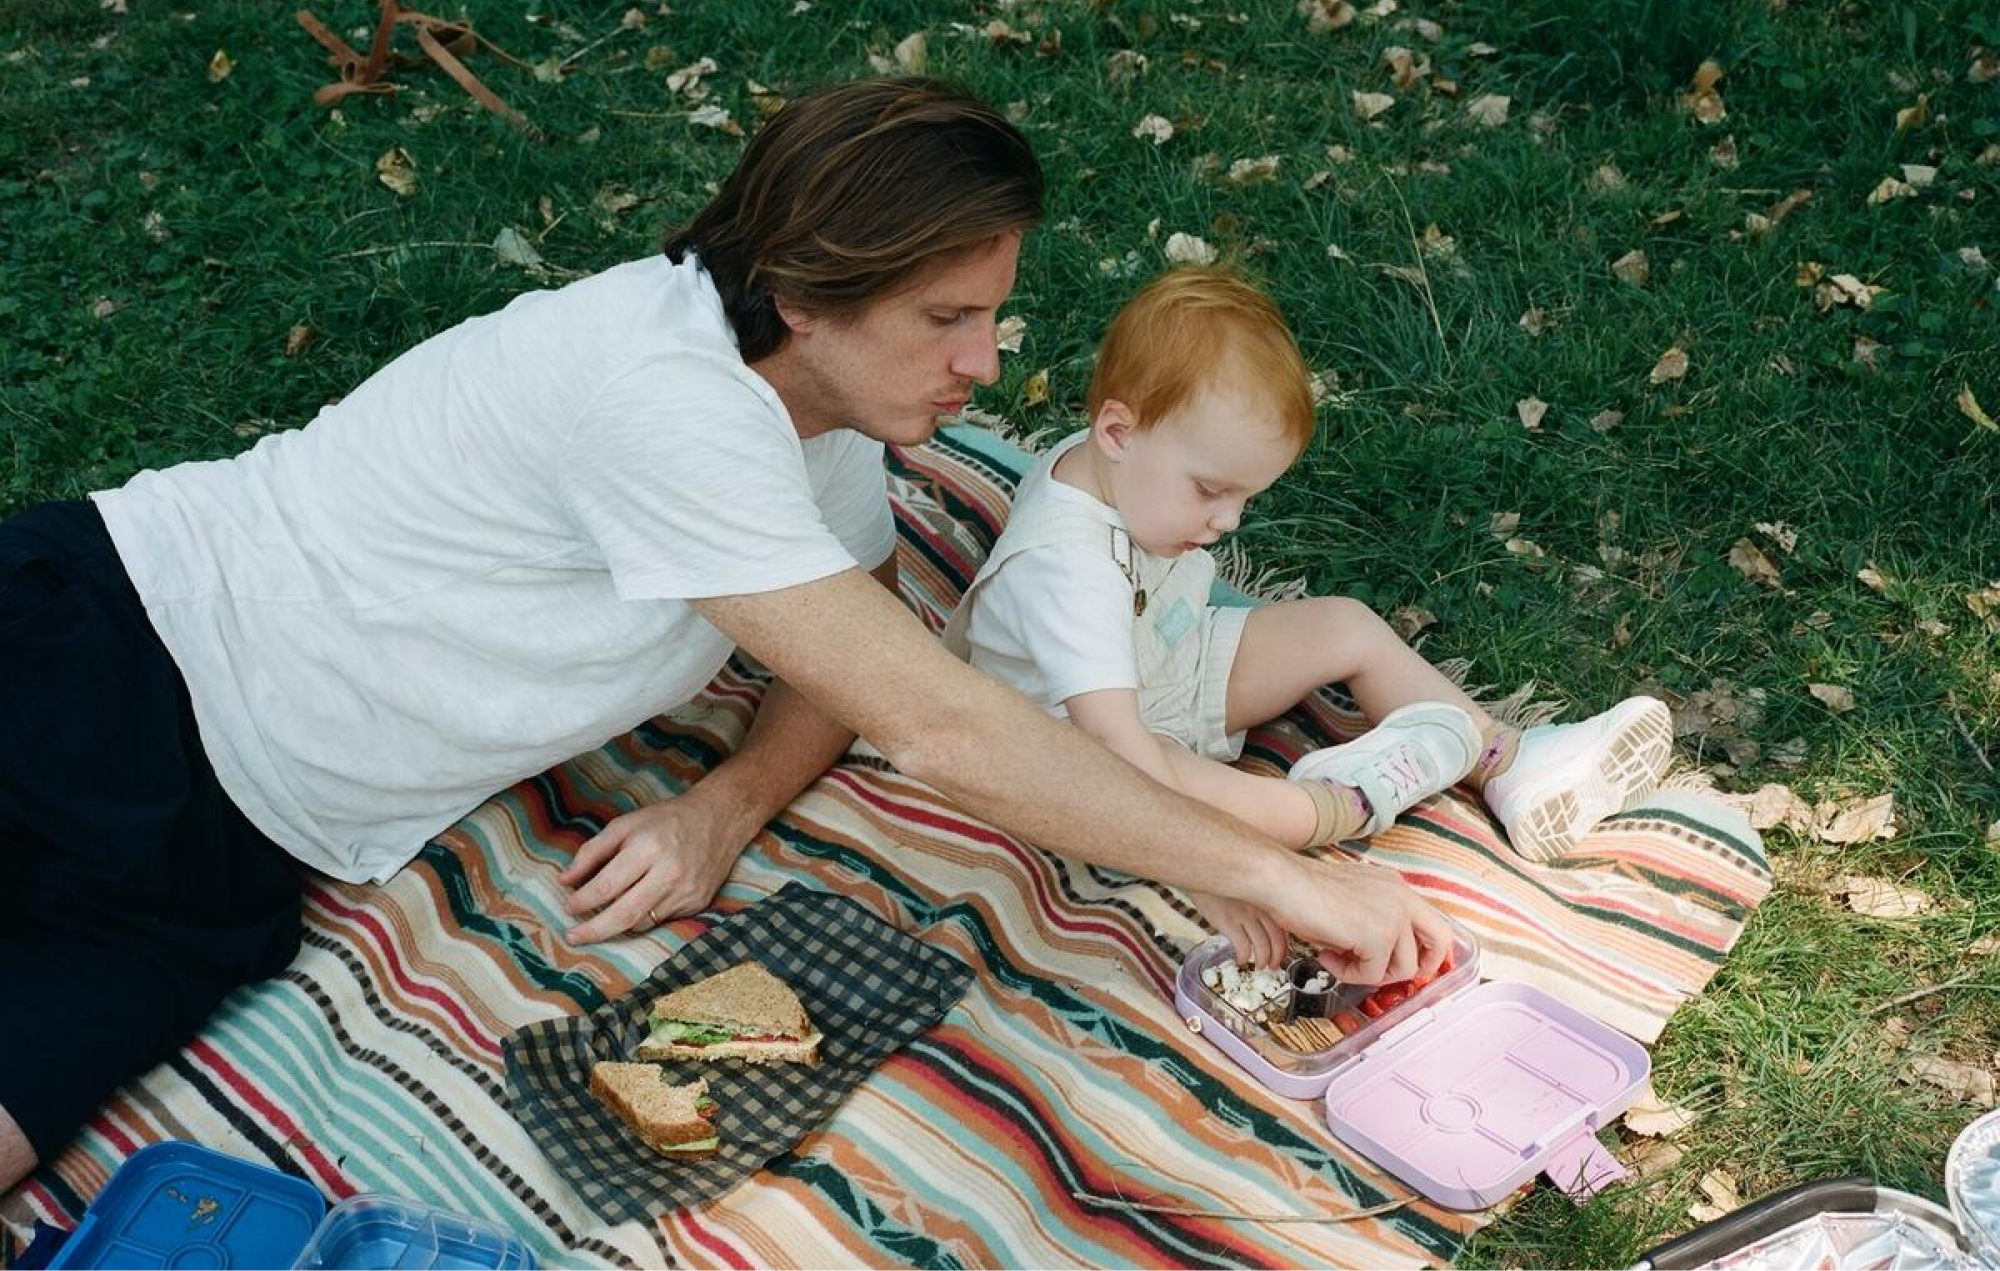 A man lies on a picnic blanket with a small child beside him and reaches for a snack.